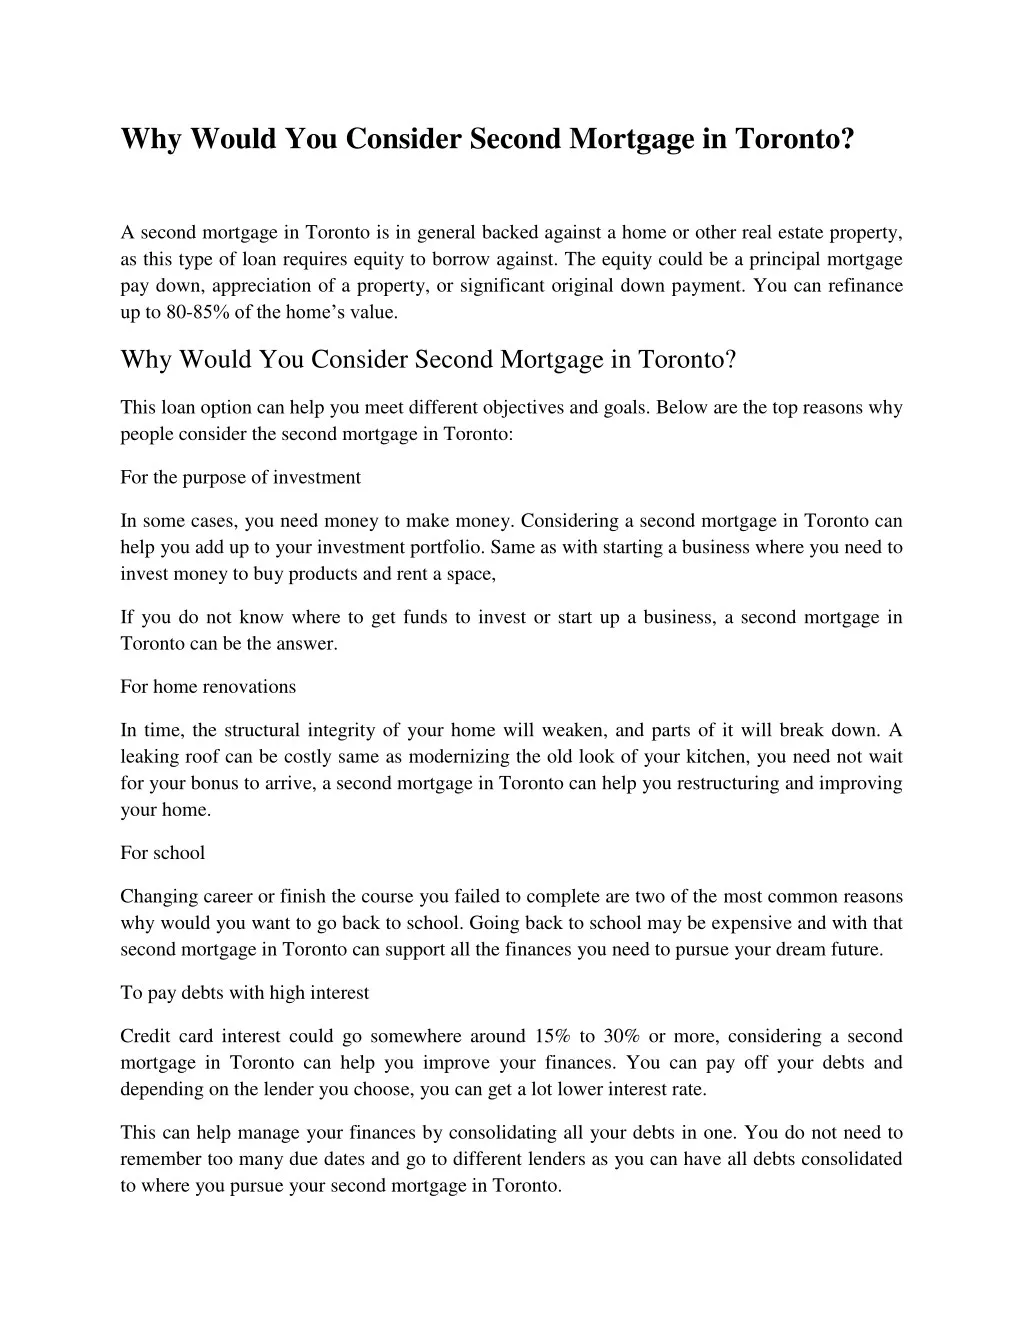 why would you consider second mortgage in toronto